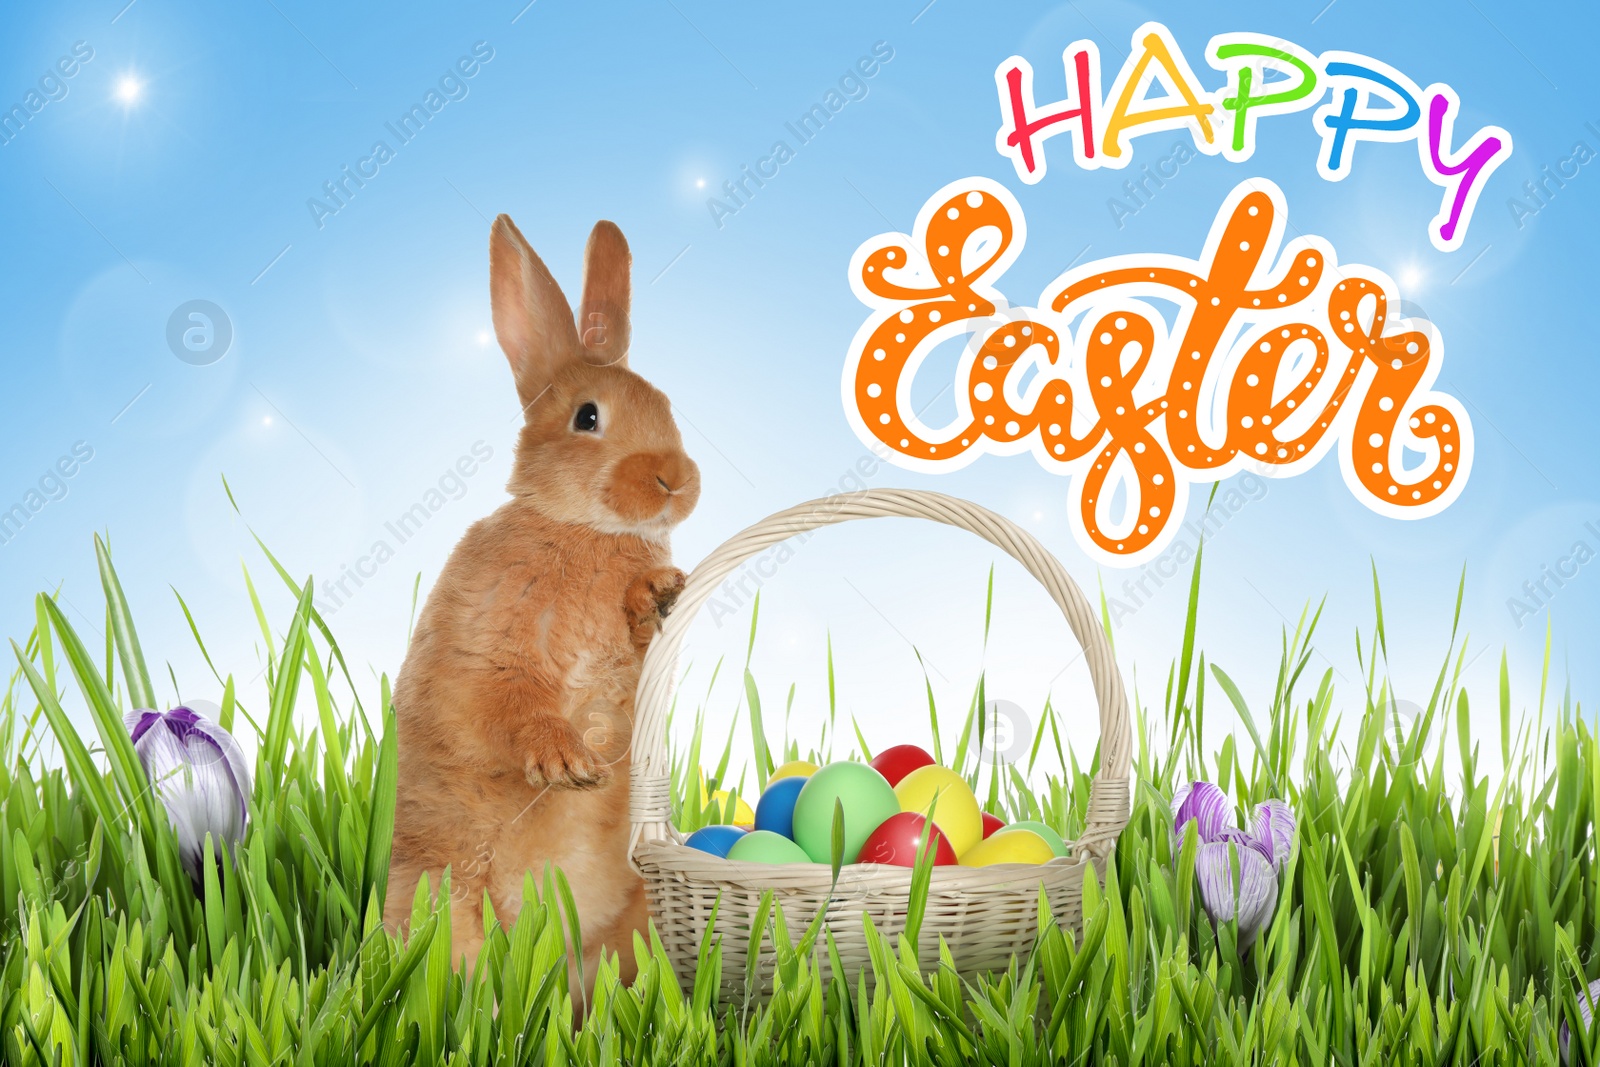 Image of Happy Easter. Adorable bunny near wicker basket with dyed eggs on green grass outdoors